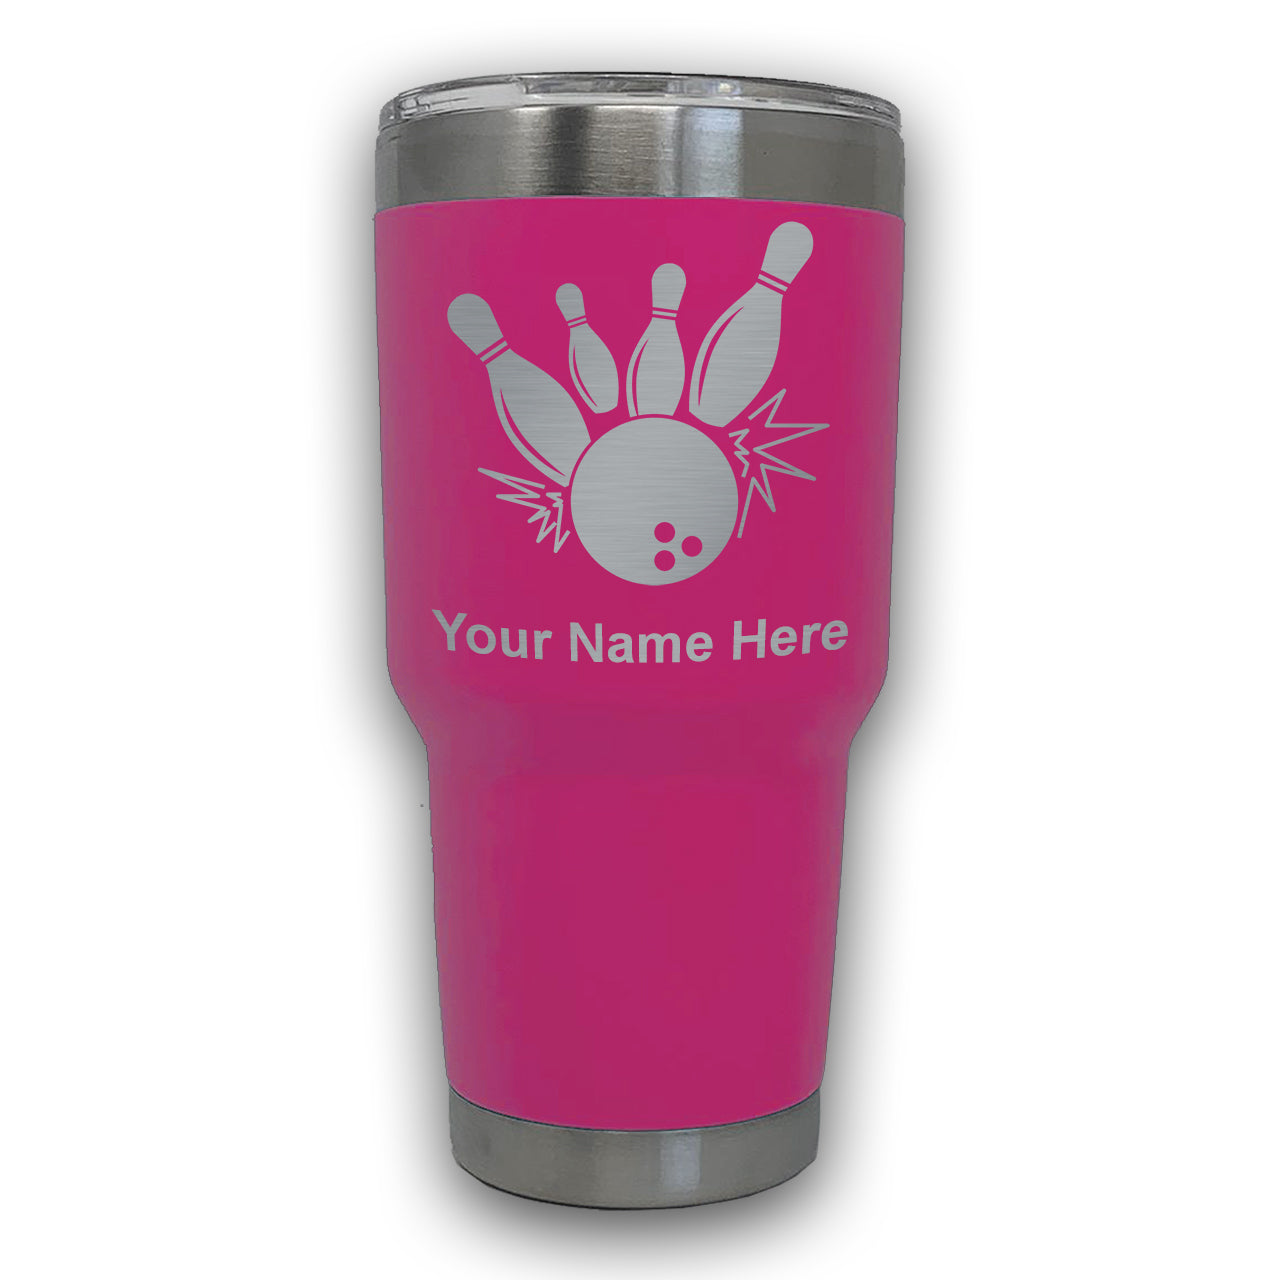 LaserGram 30oz Tumbler Mug, Bowling Ball and Pins, Personalized Engraving Included